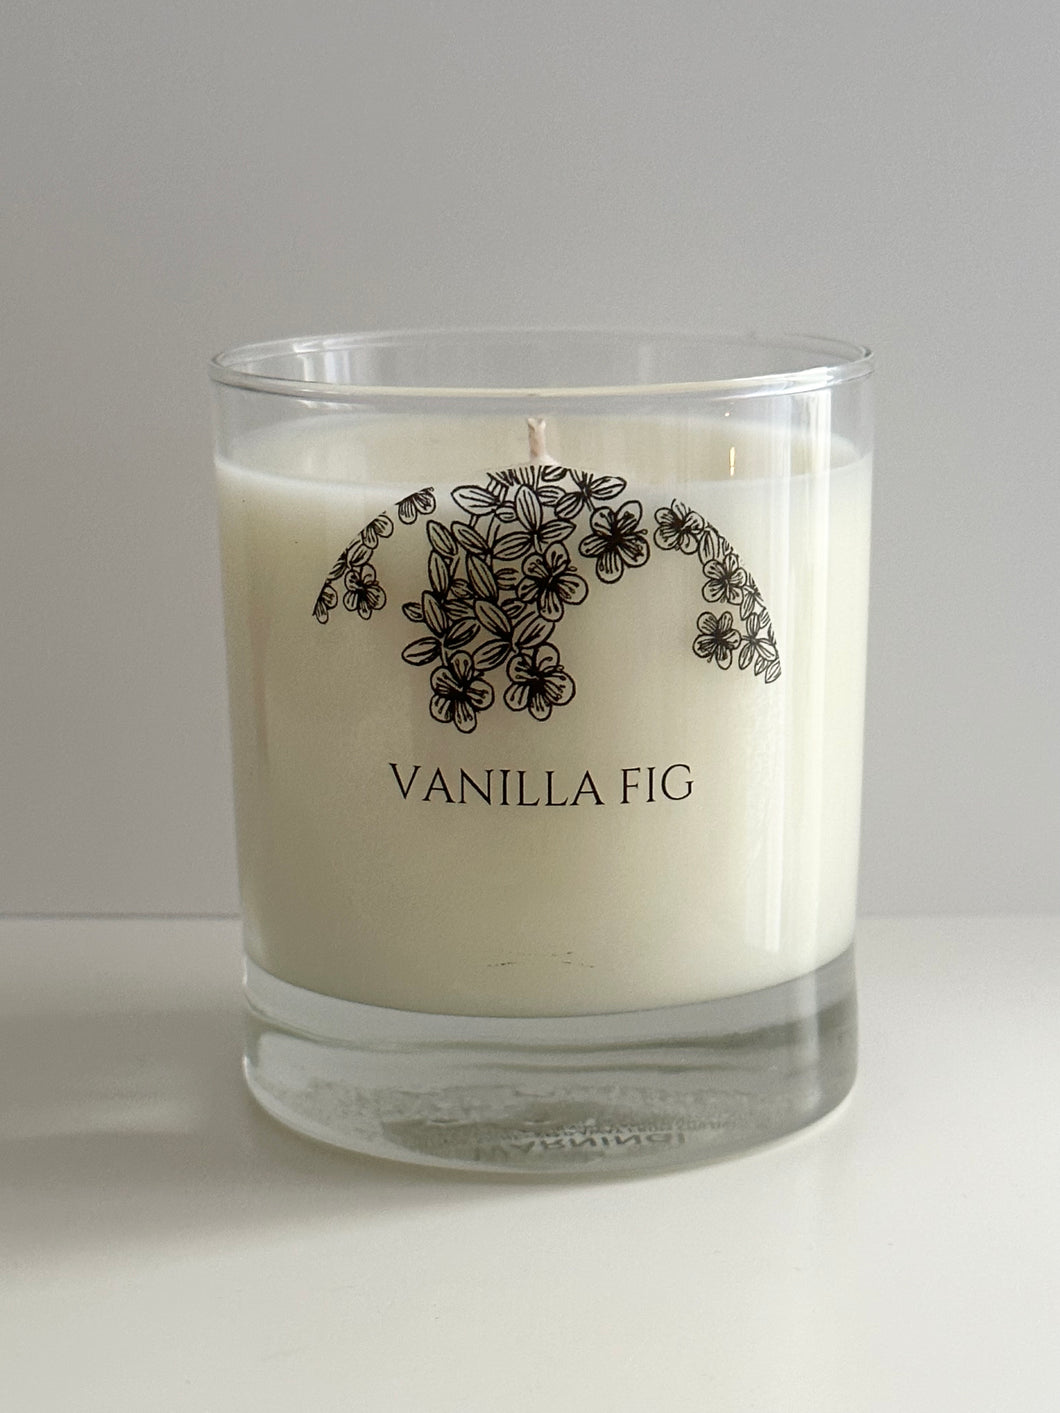 VANILLA FIG SOY CANDLE